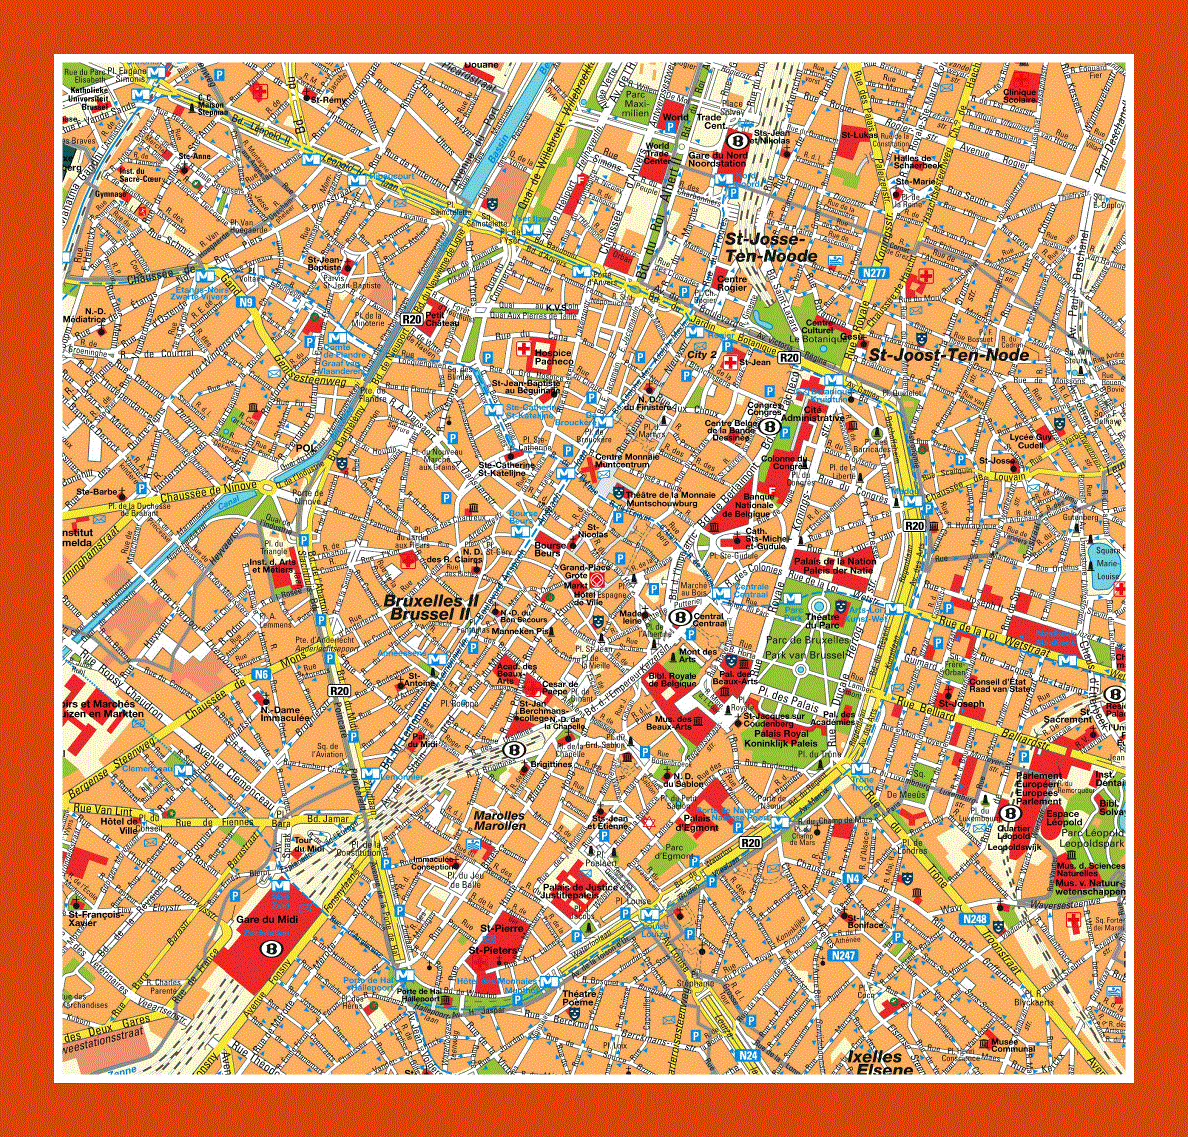 Tourist map of Brussels city center